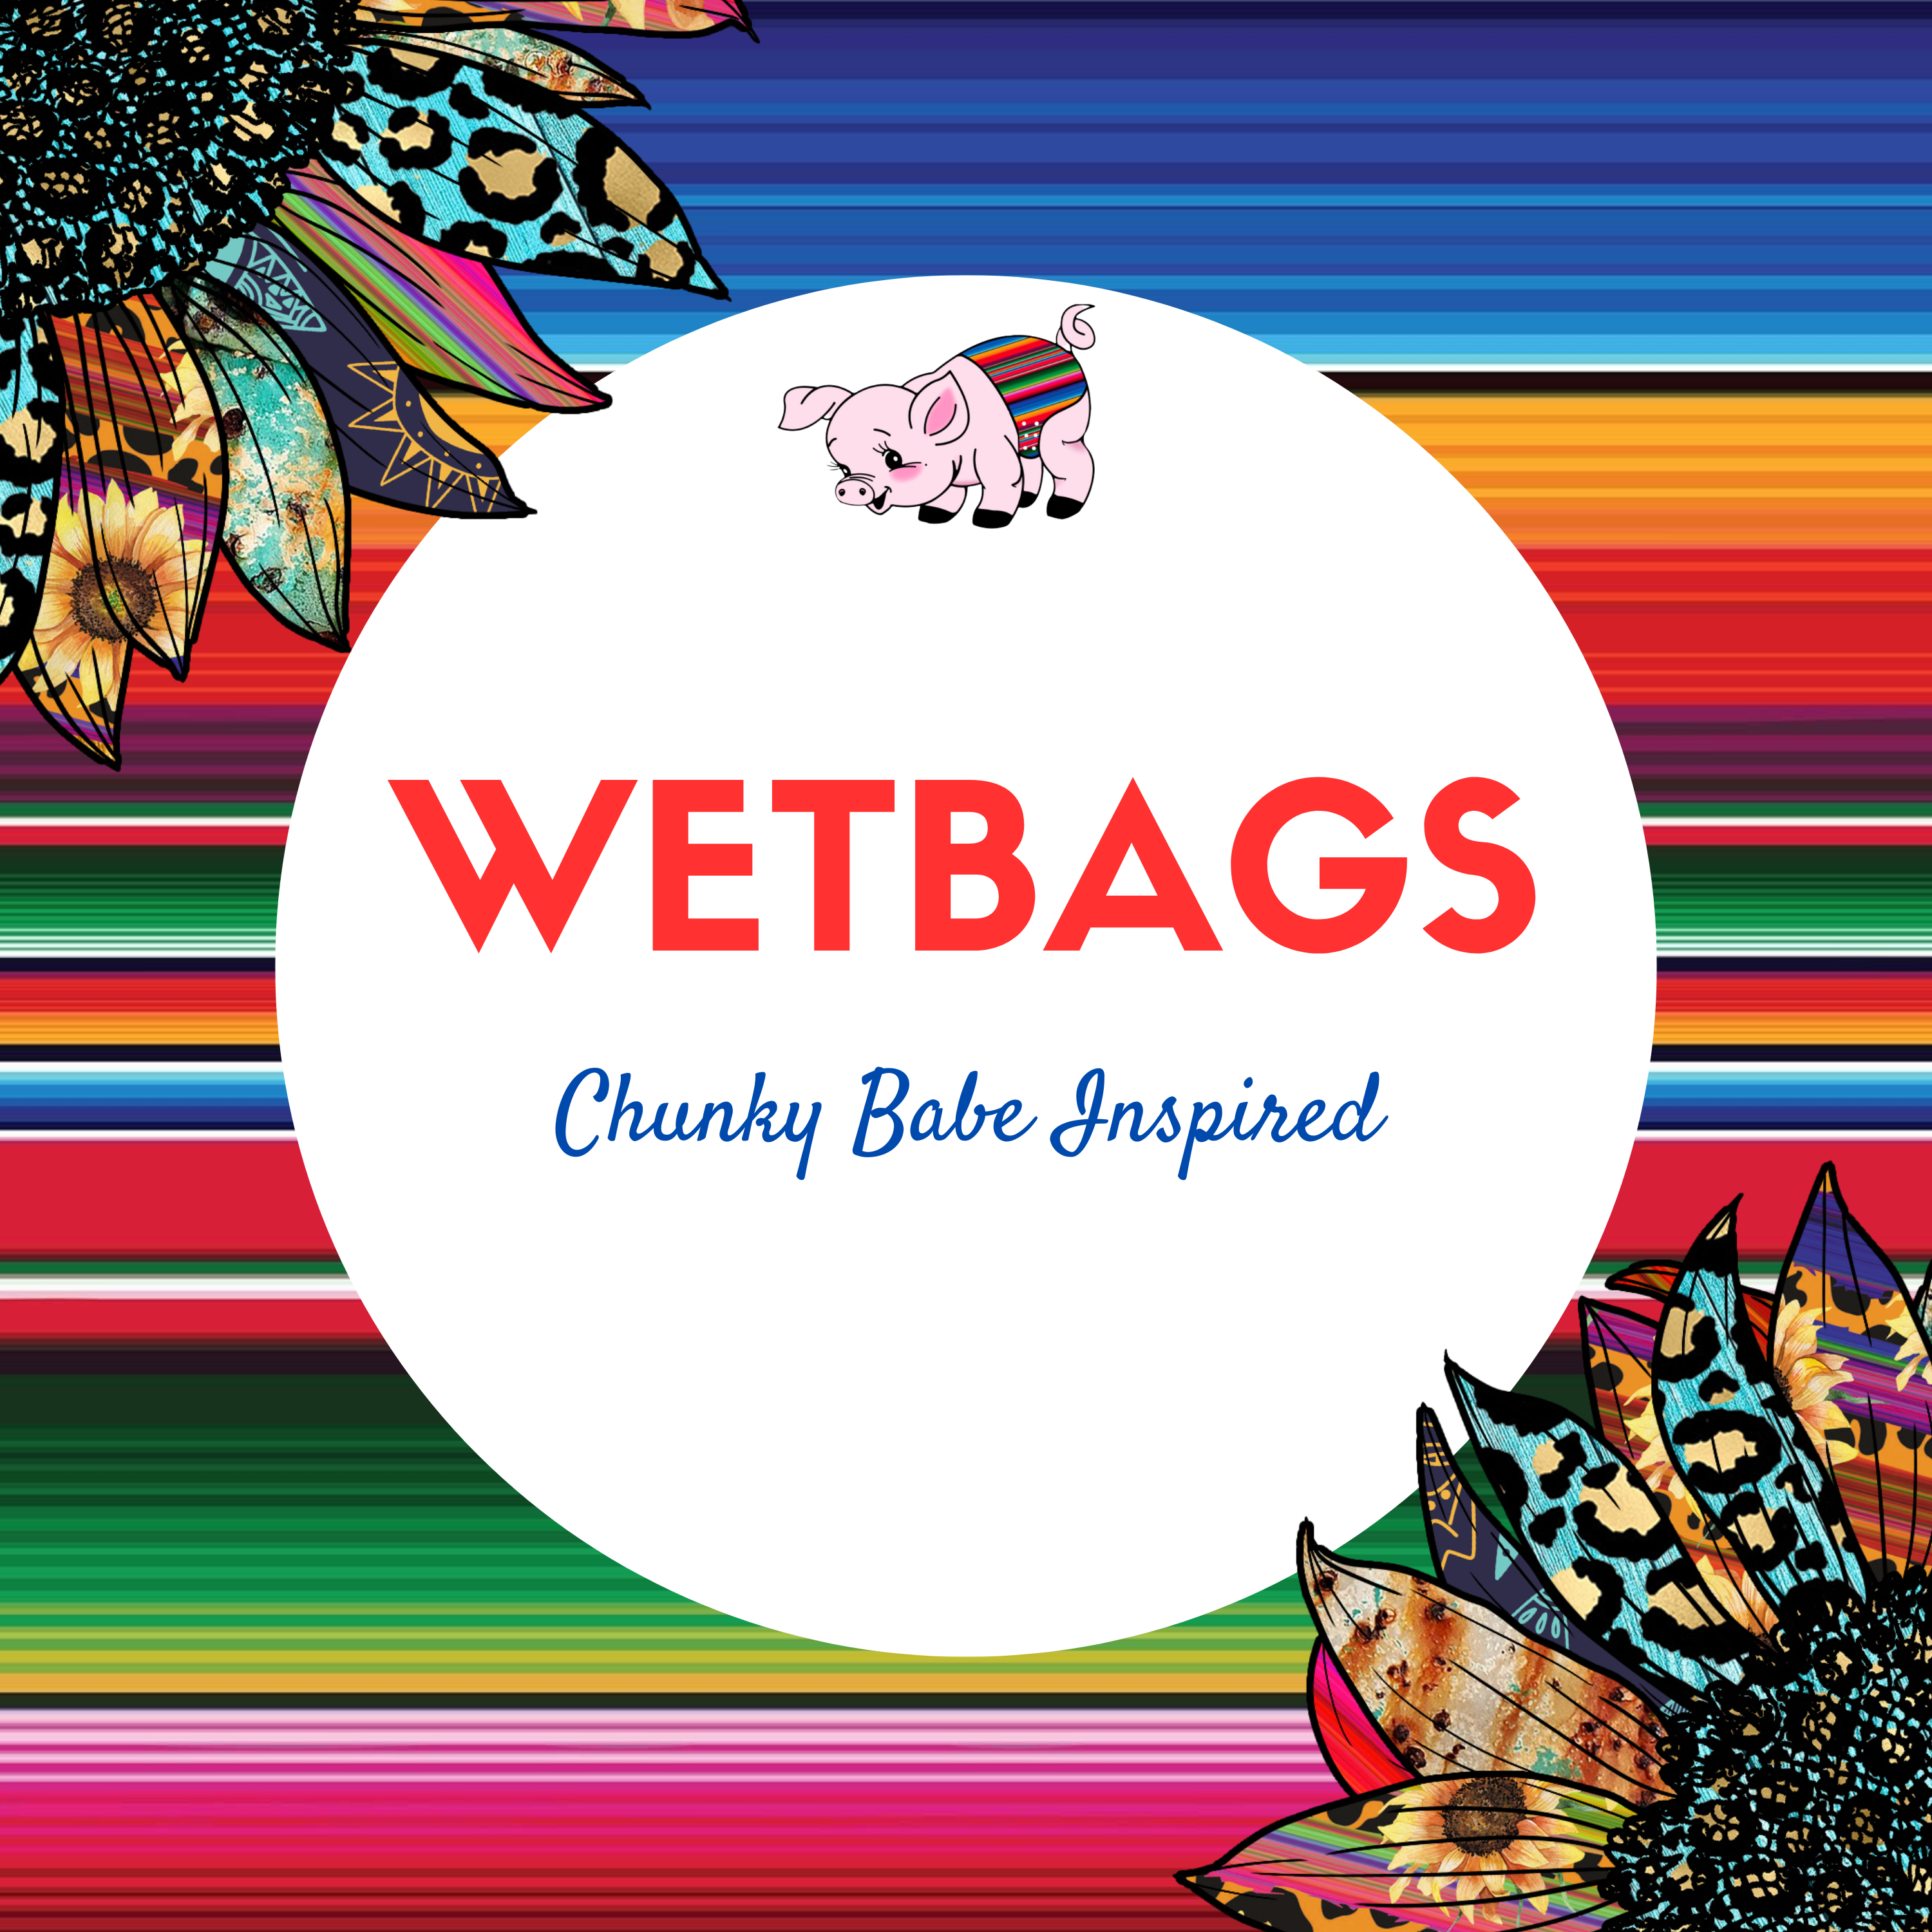 Wetbags